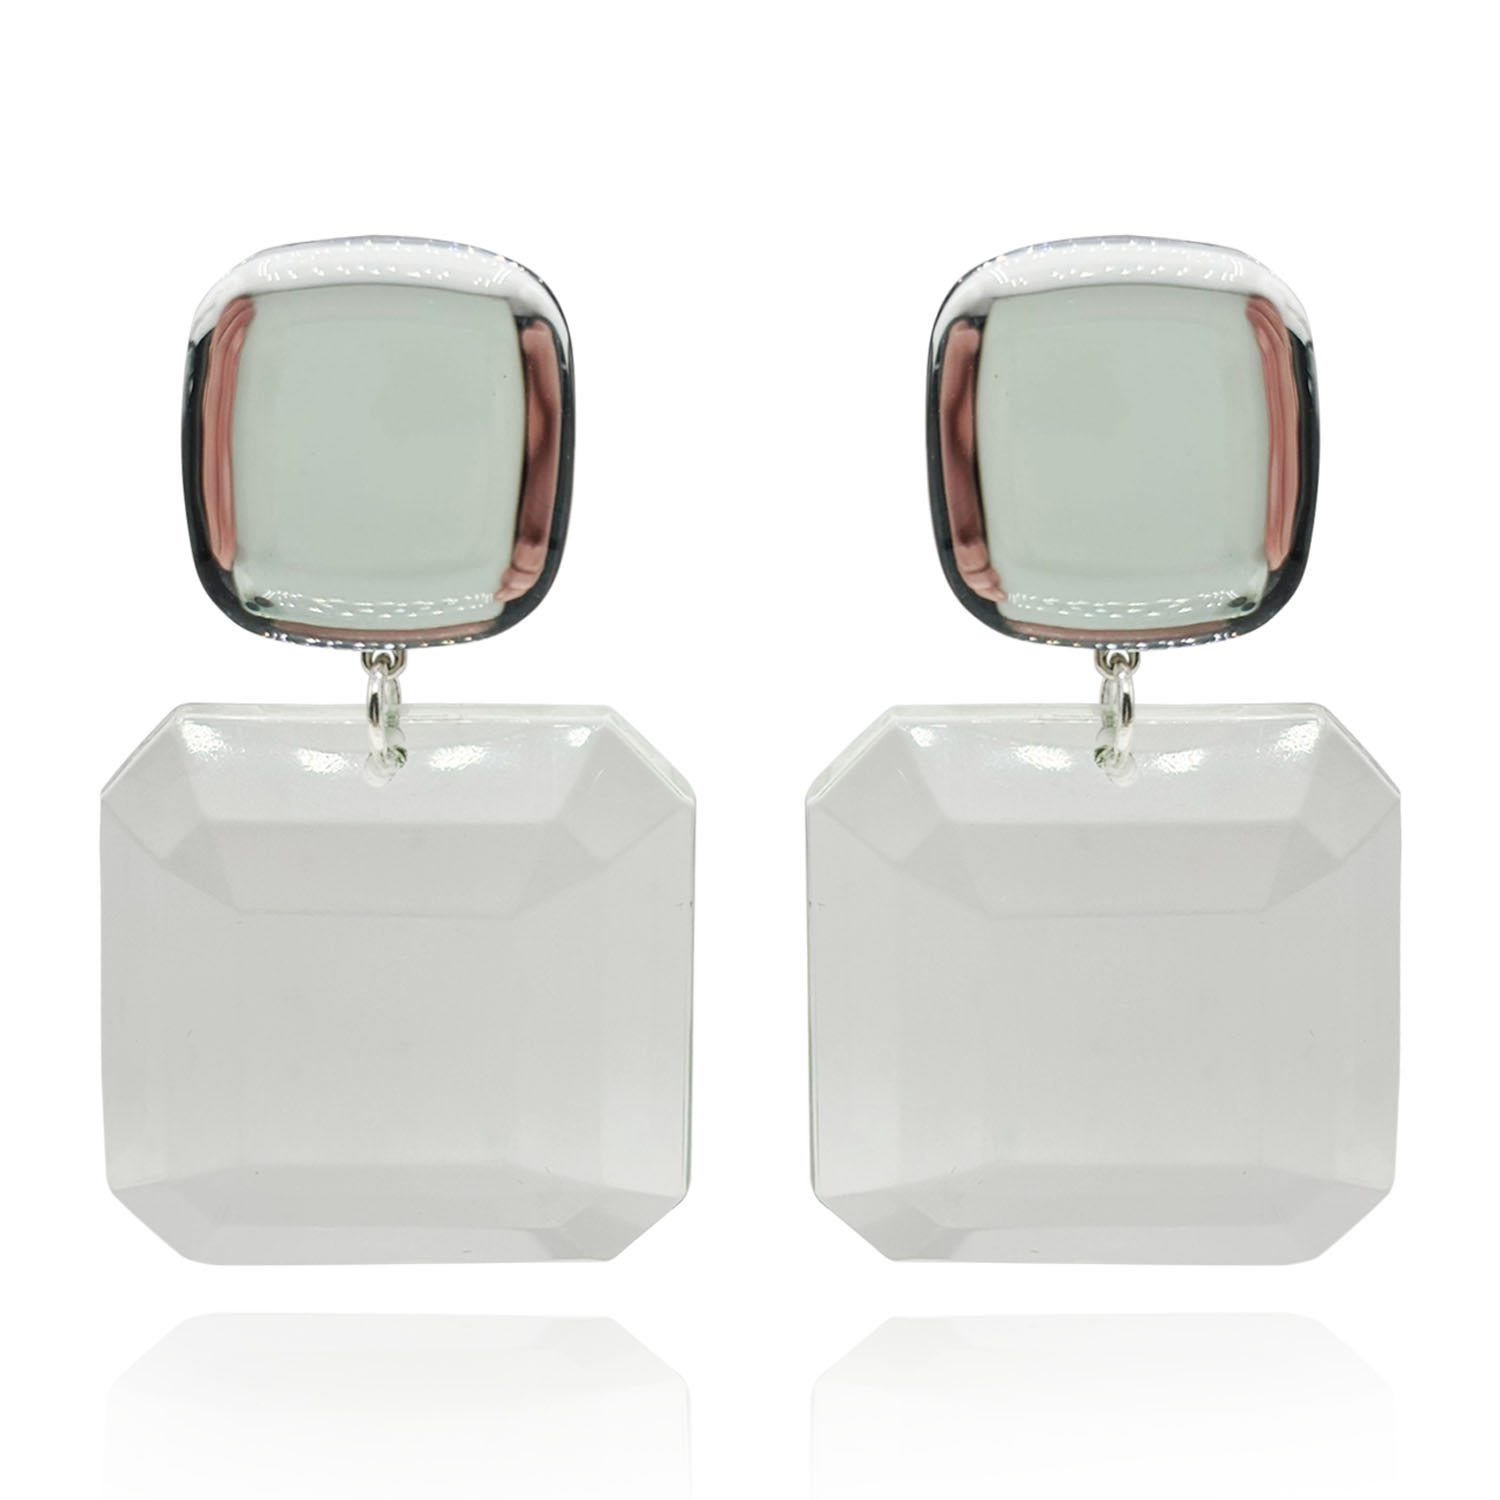 Michael Nash Jewelry Women's Neutrals Italian Mirrored Resin Clip On Earrings With Clear Faceted Bottoms In Gray